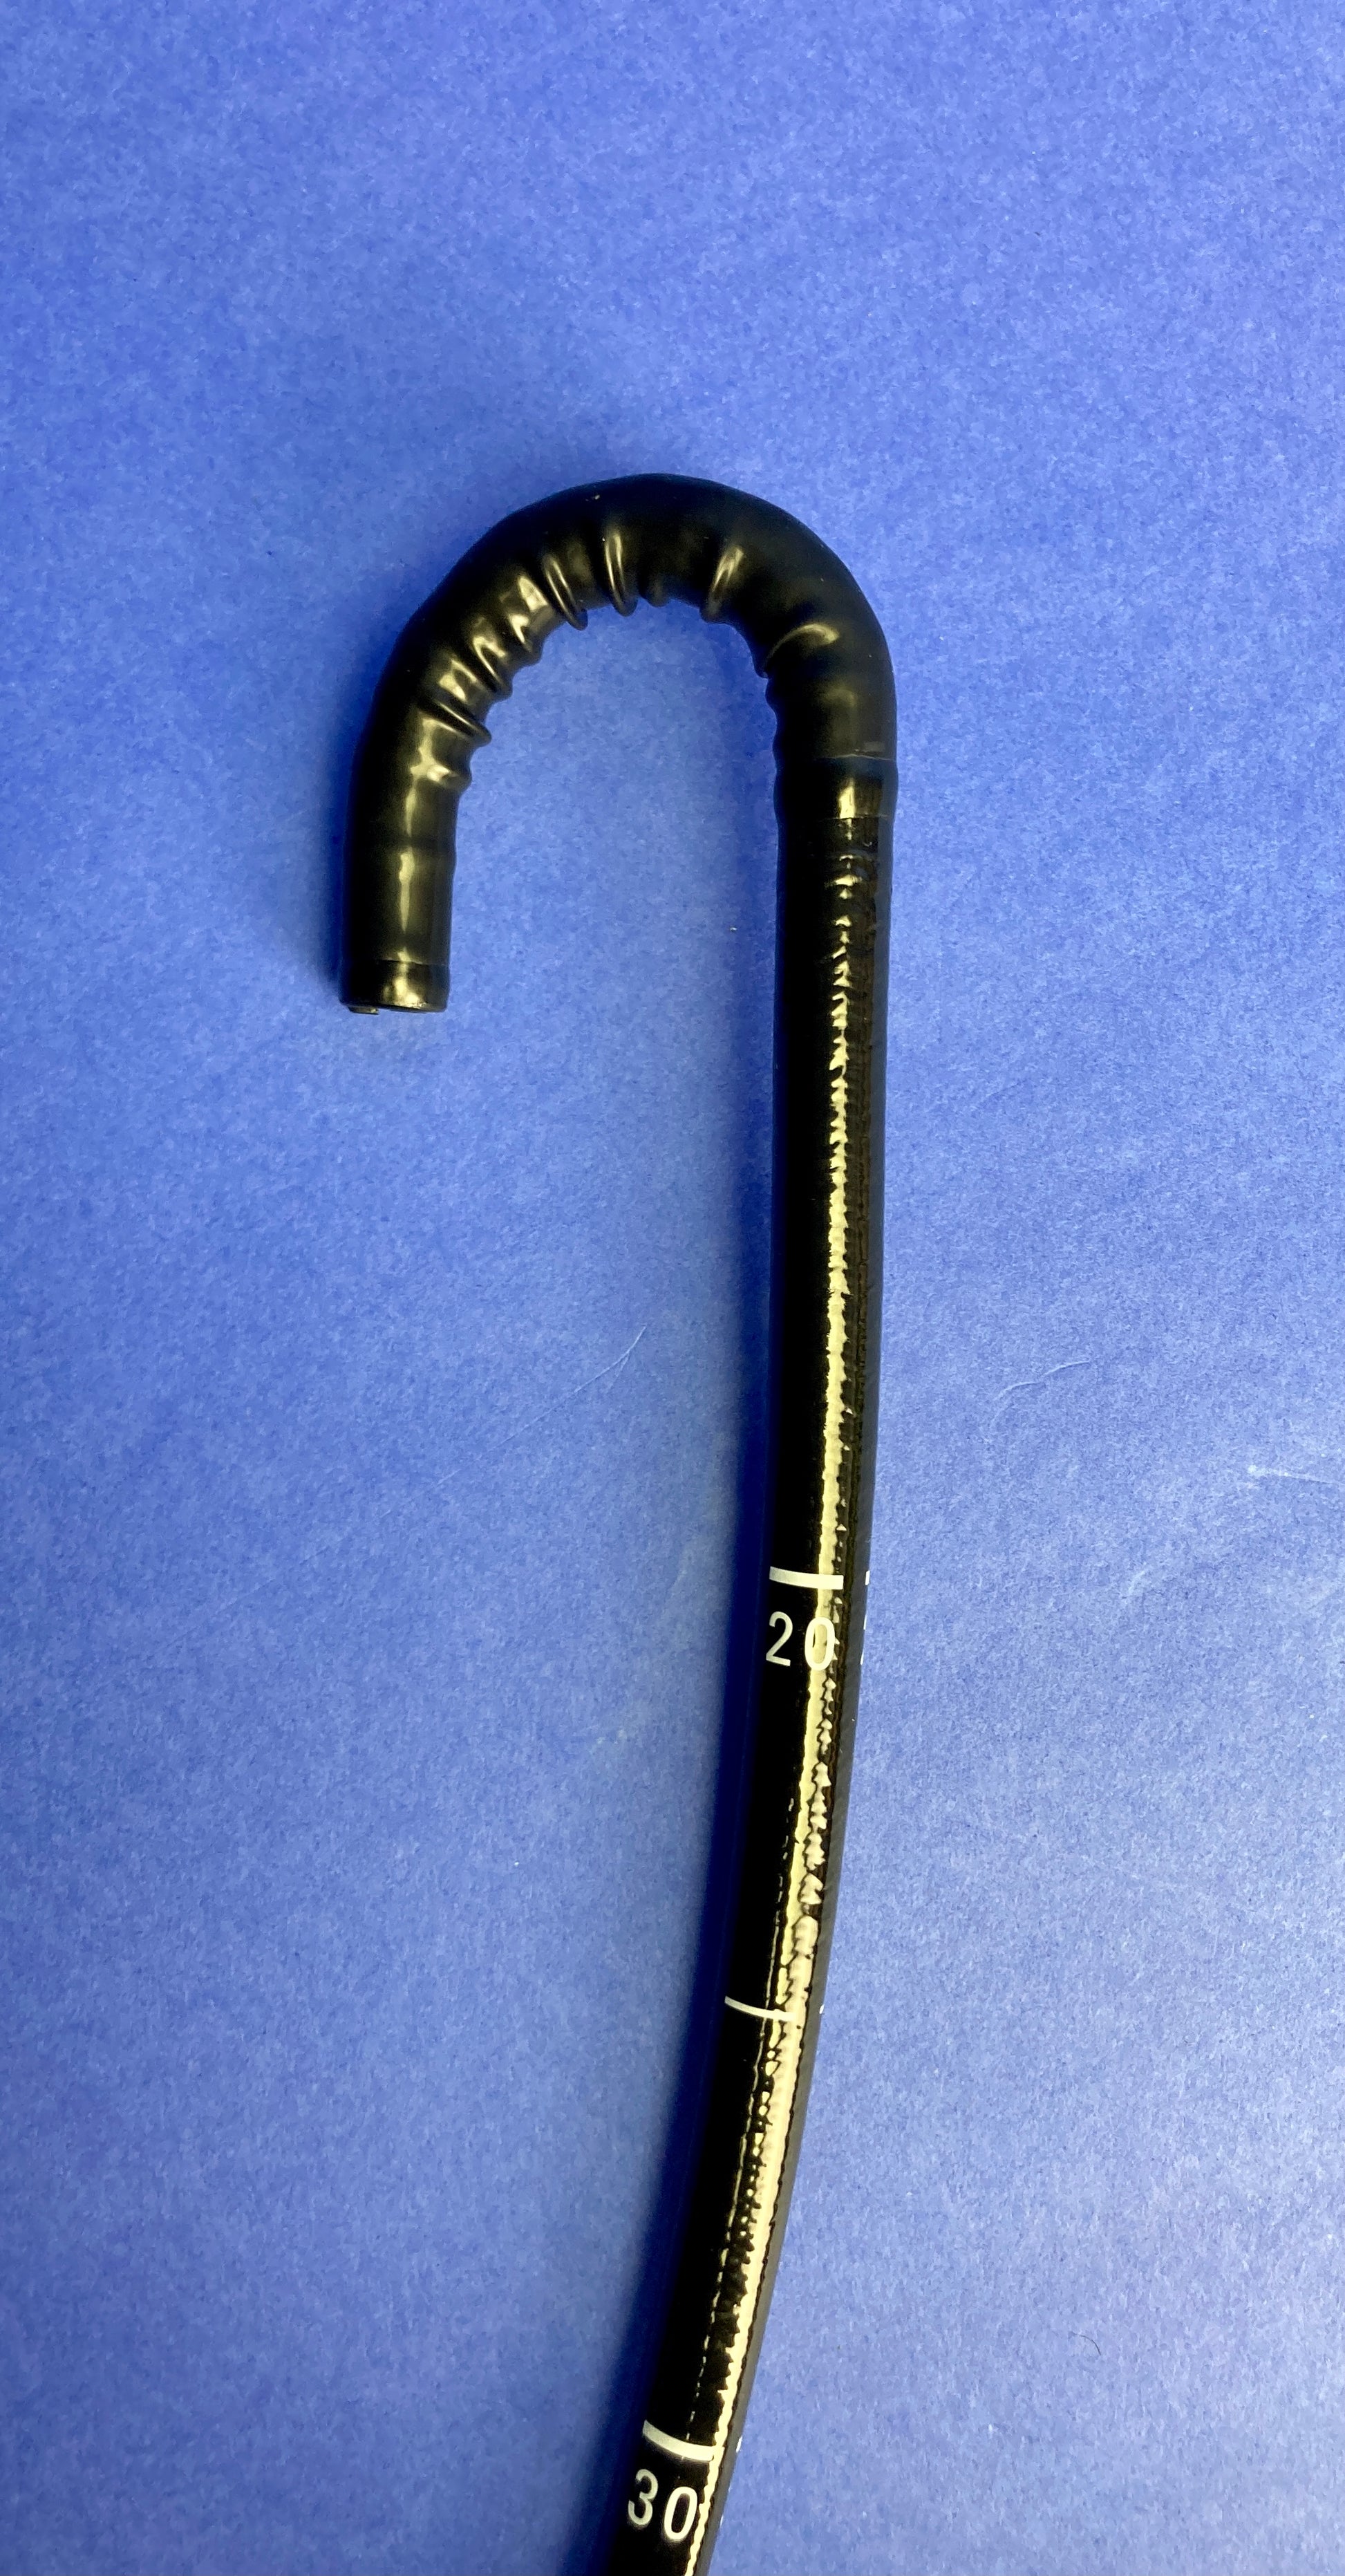 Different view of angulation of the Endoscope